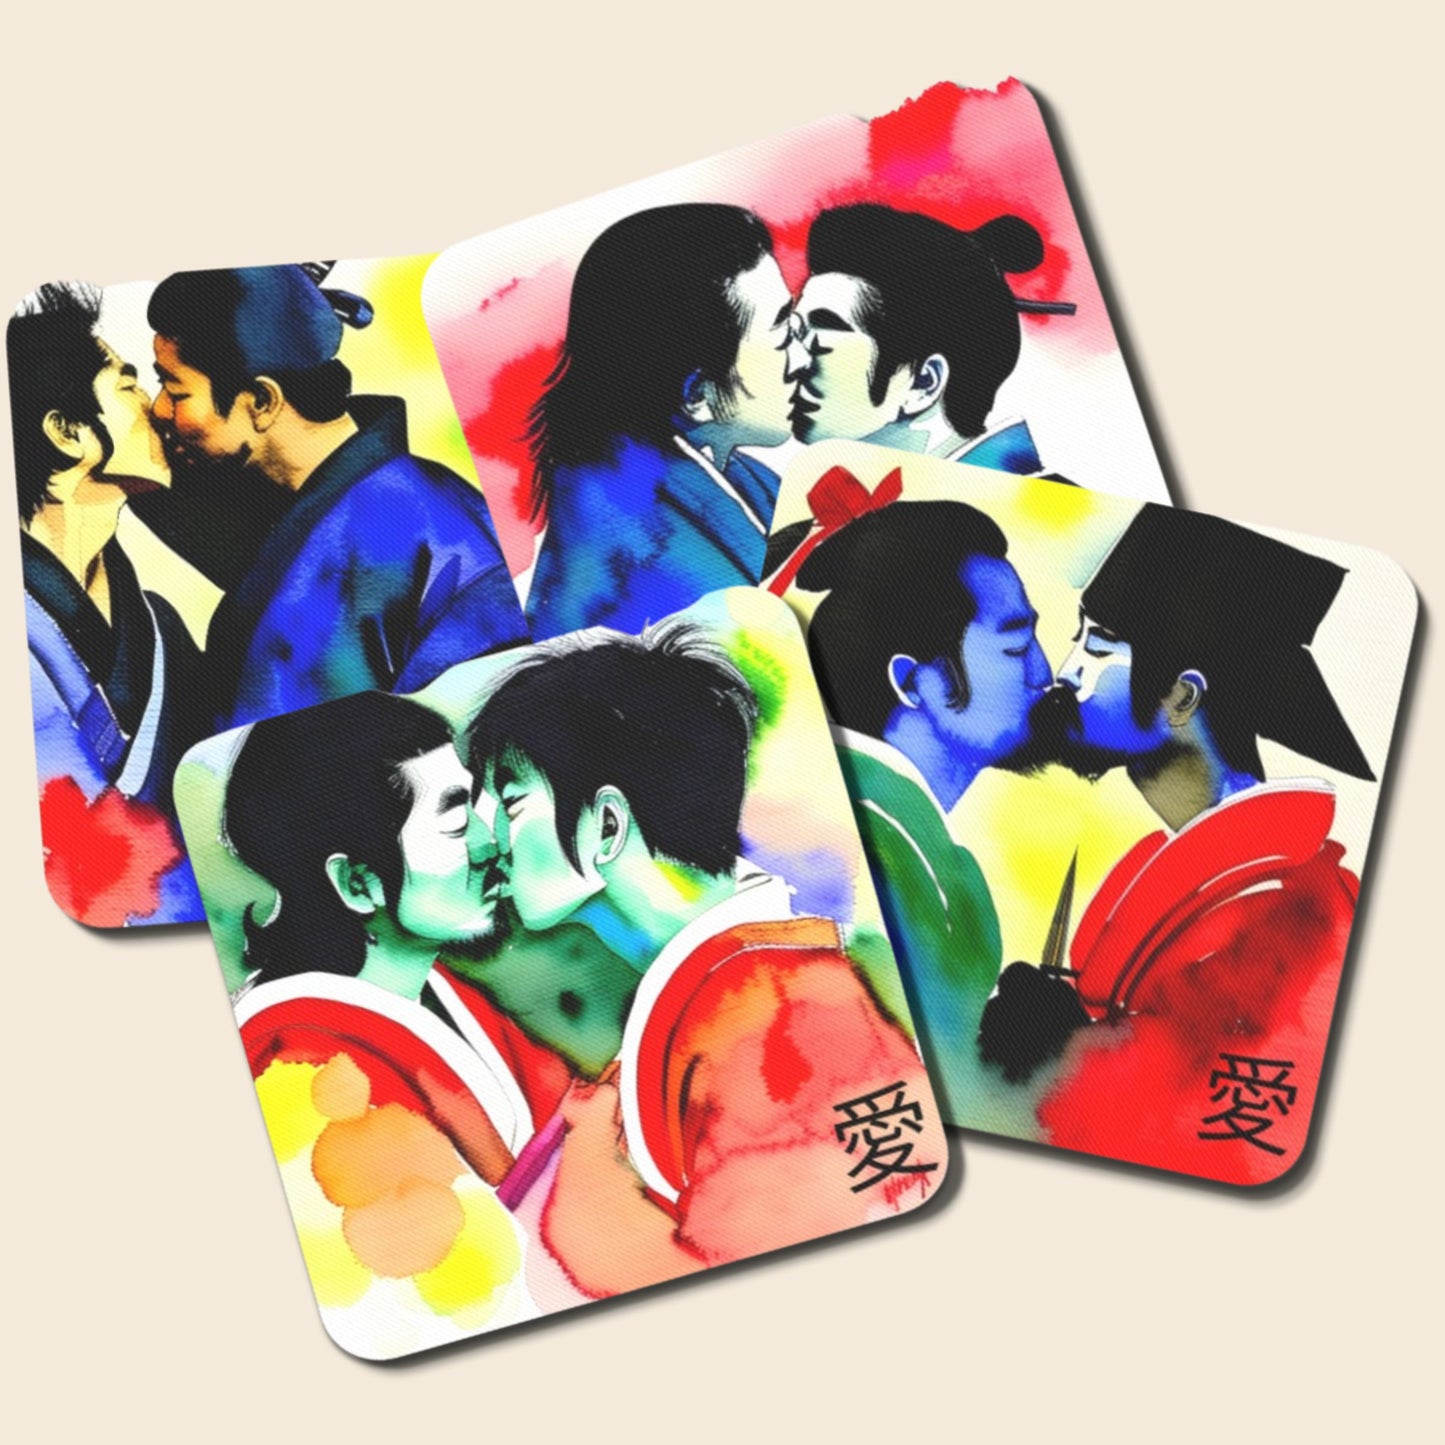 Samurais In Love Coasters all 4 options together